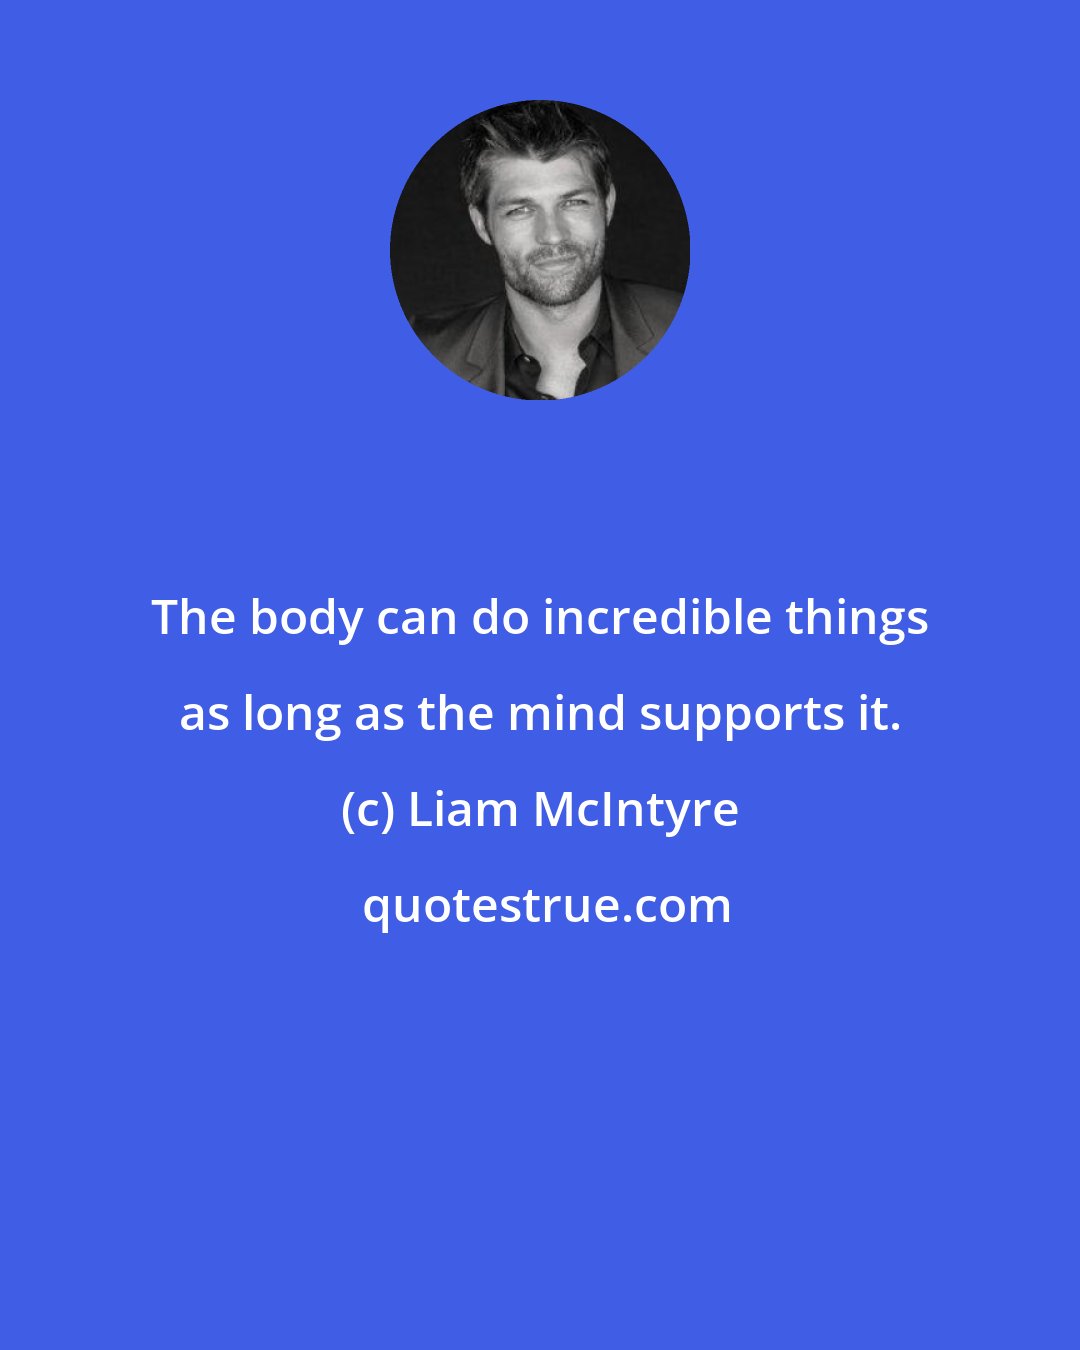 Liam McIntyre: The body can do incredible things as long as the mind supports it.